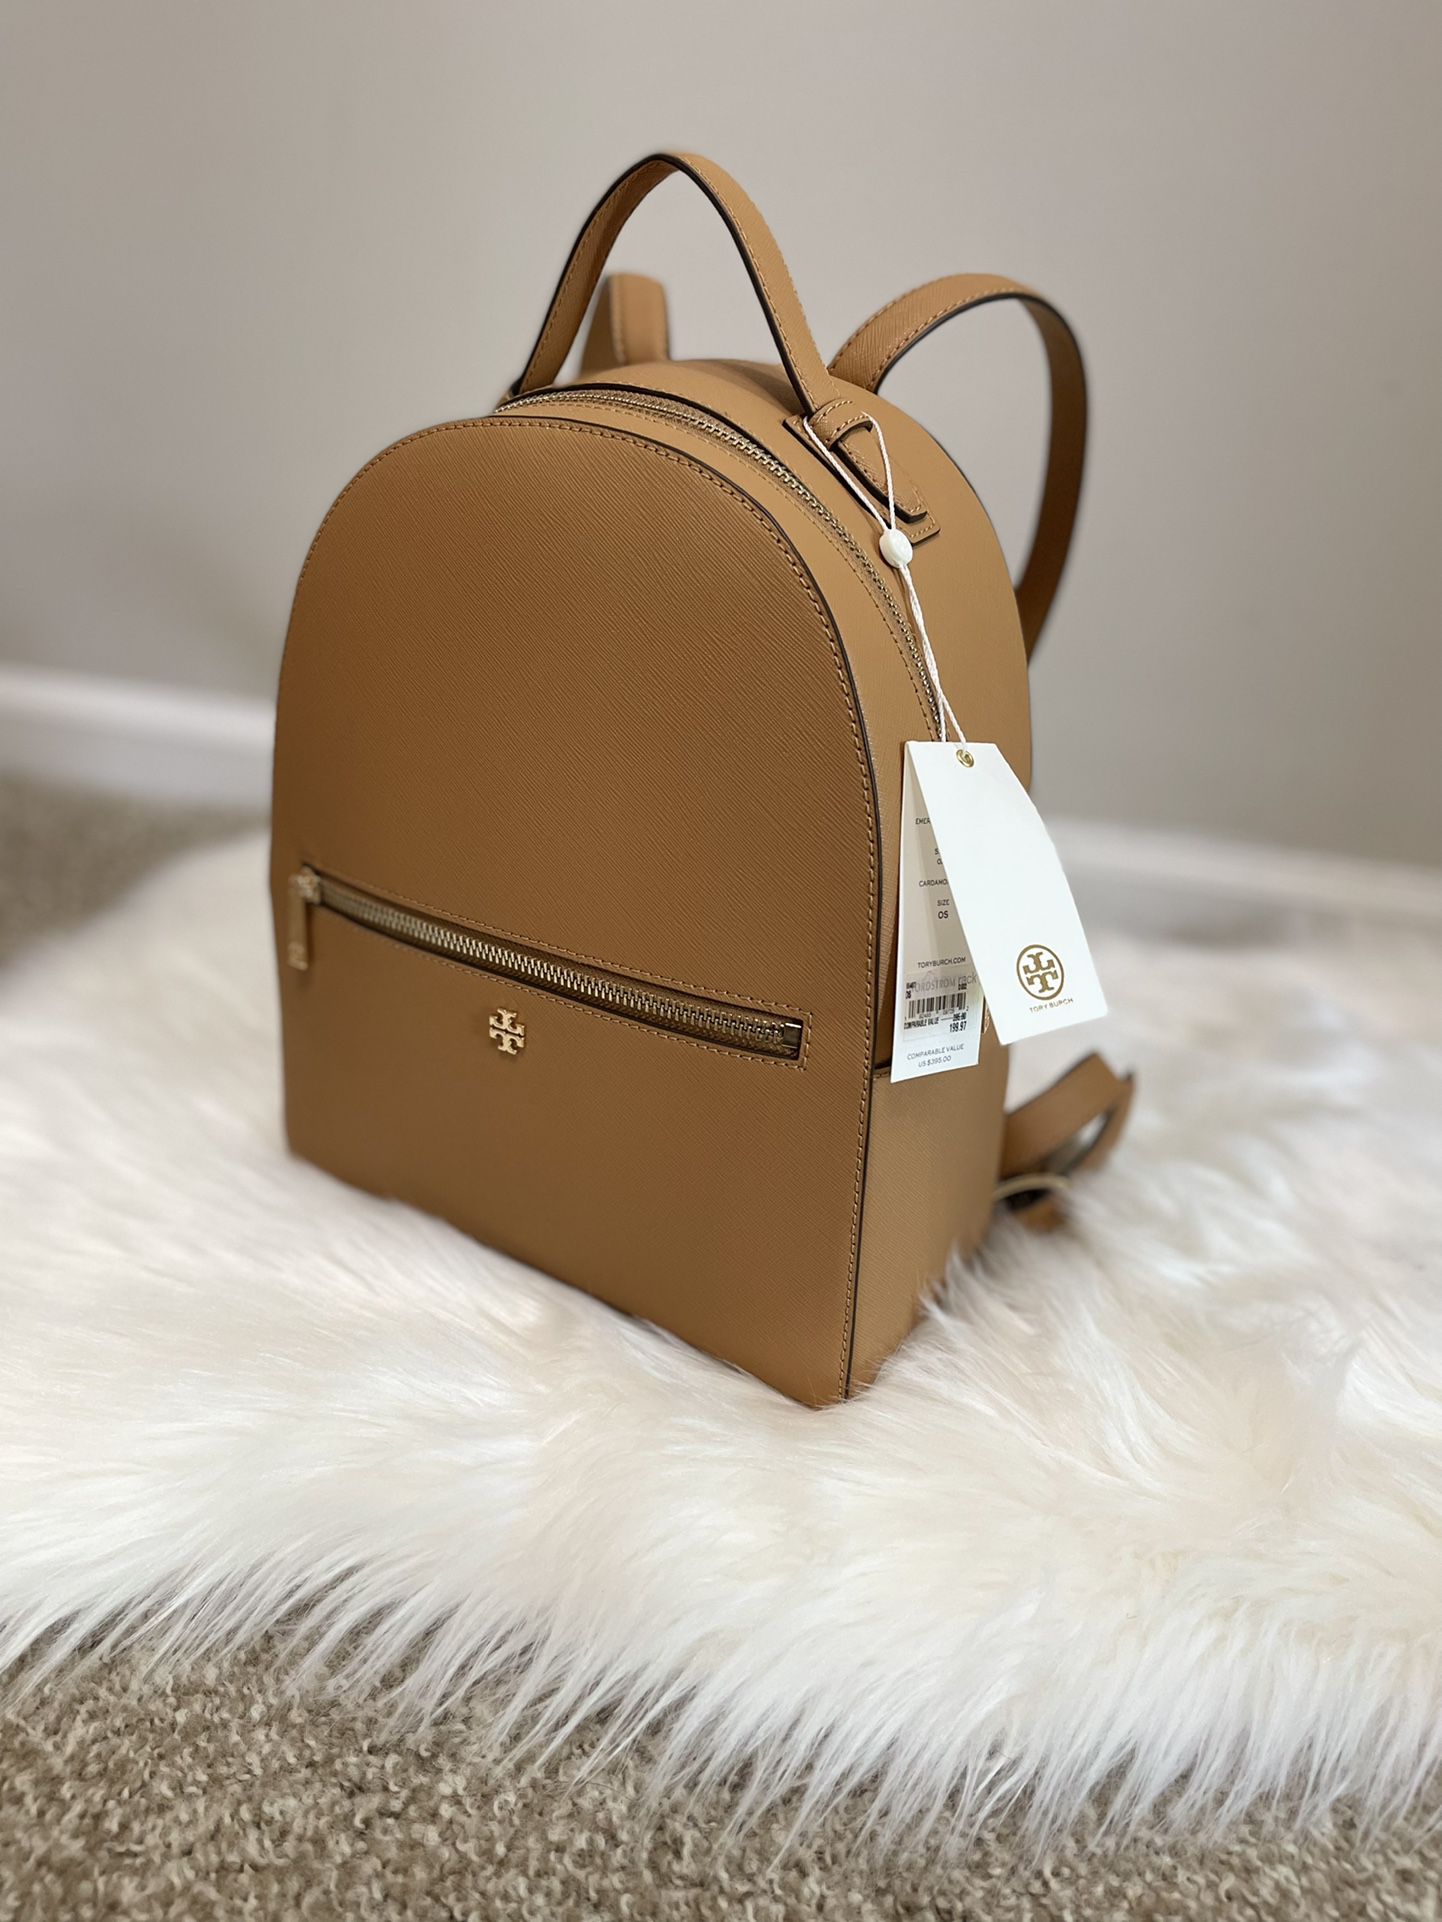 Tory Burch Emerson Backpack - Cardamom/Tan for Sale in Dearborn, MI -  OfferUp